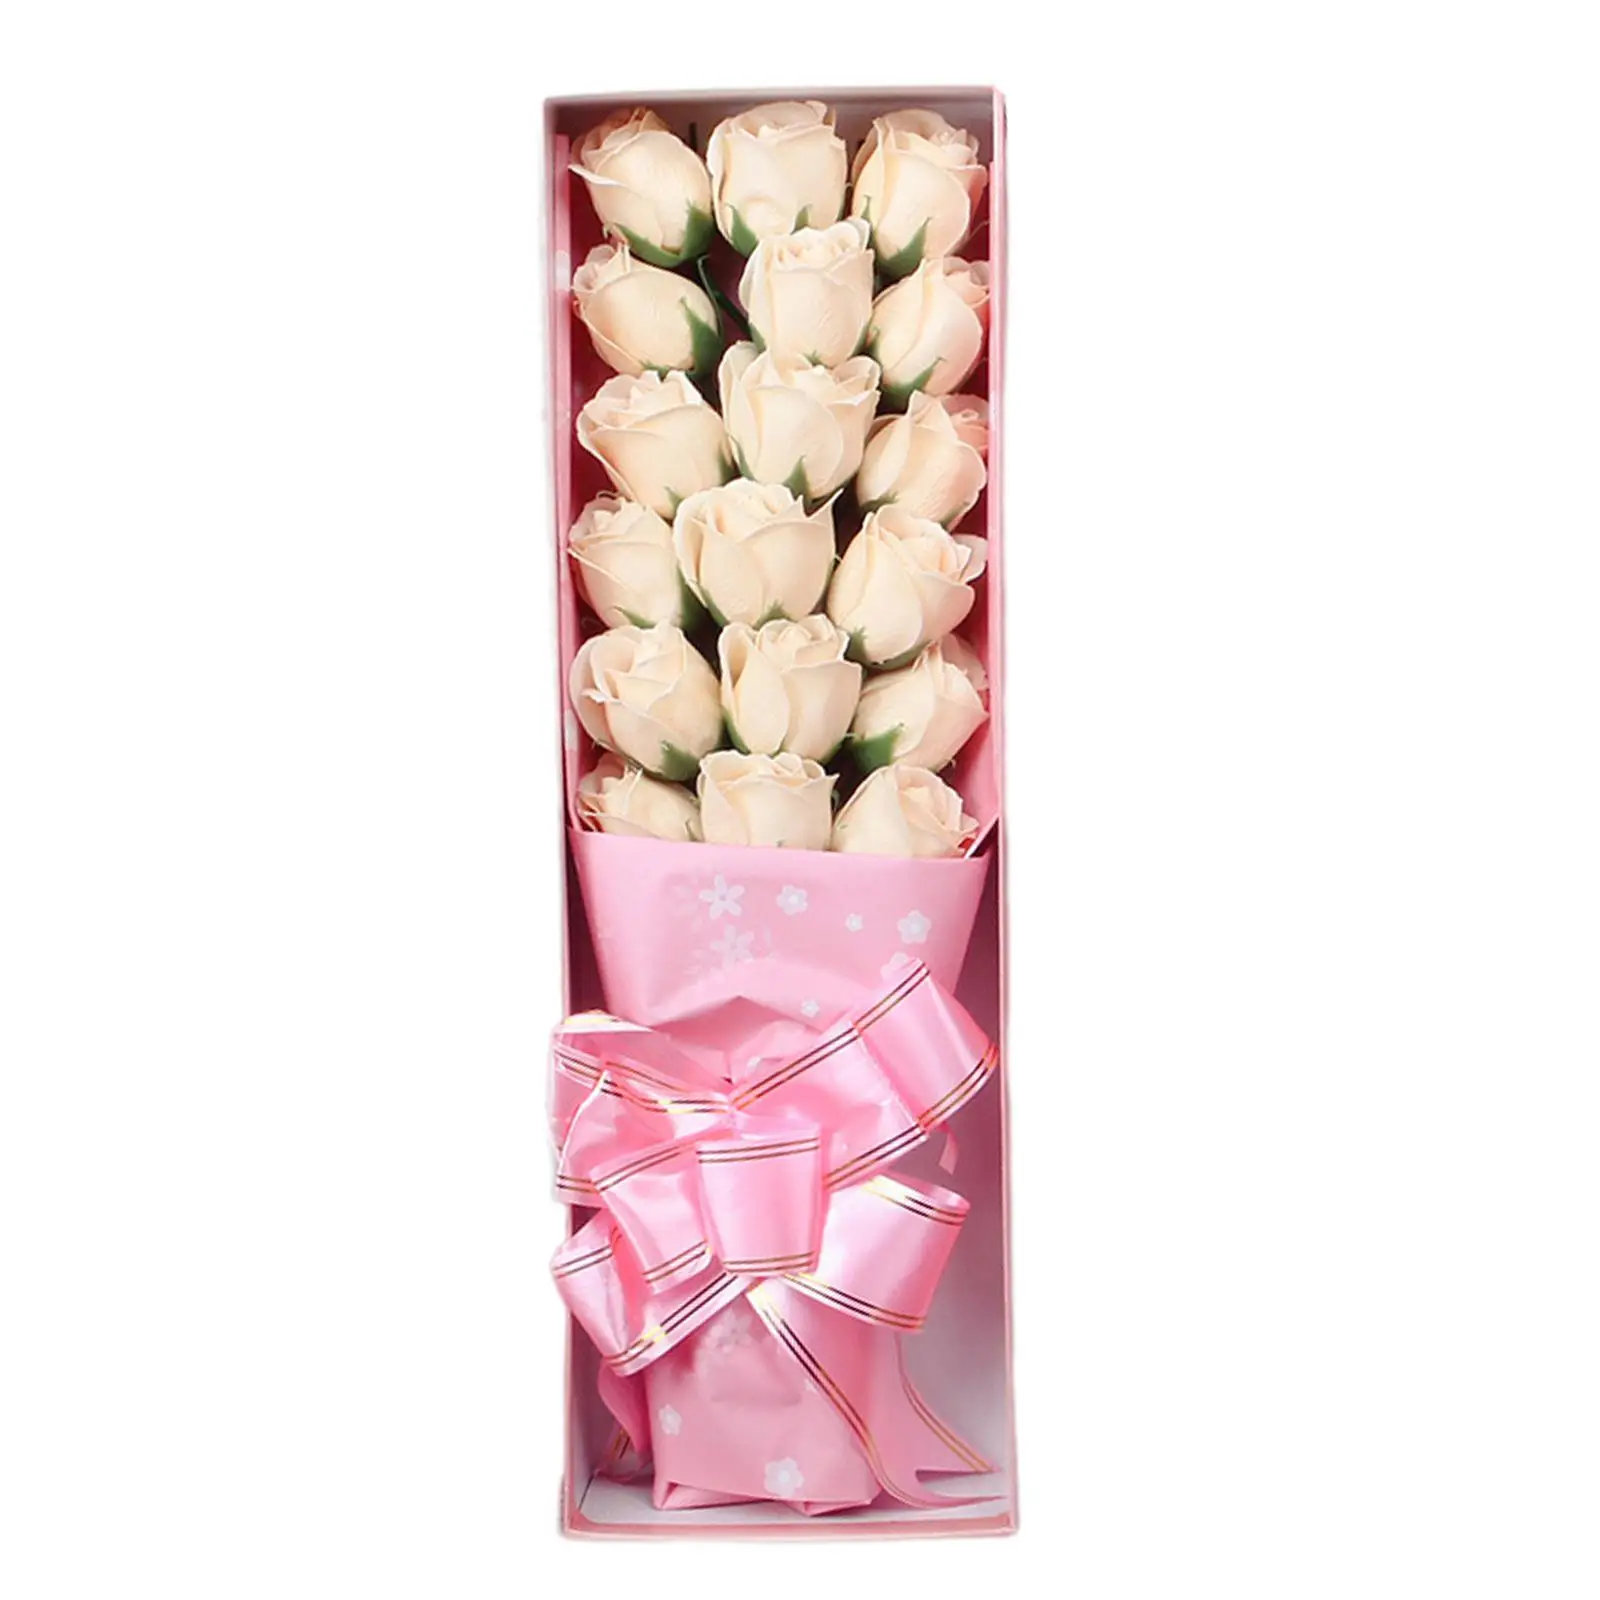 Soap Roses Gift Ideas Ornaments Decorative soap flower Flower Bouquet for Valentine`s Day Mother`s Day Birthday Desktop Party